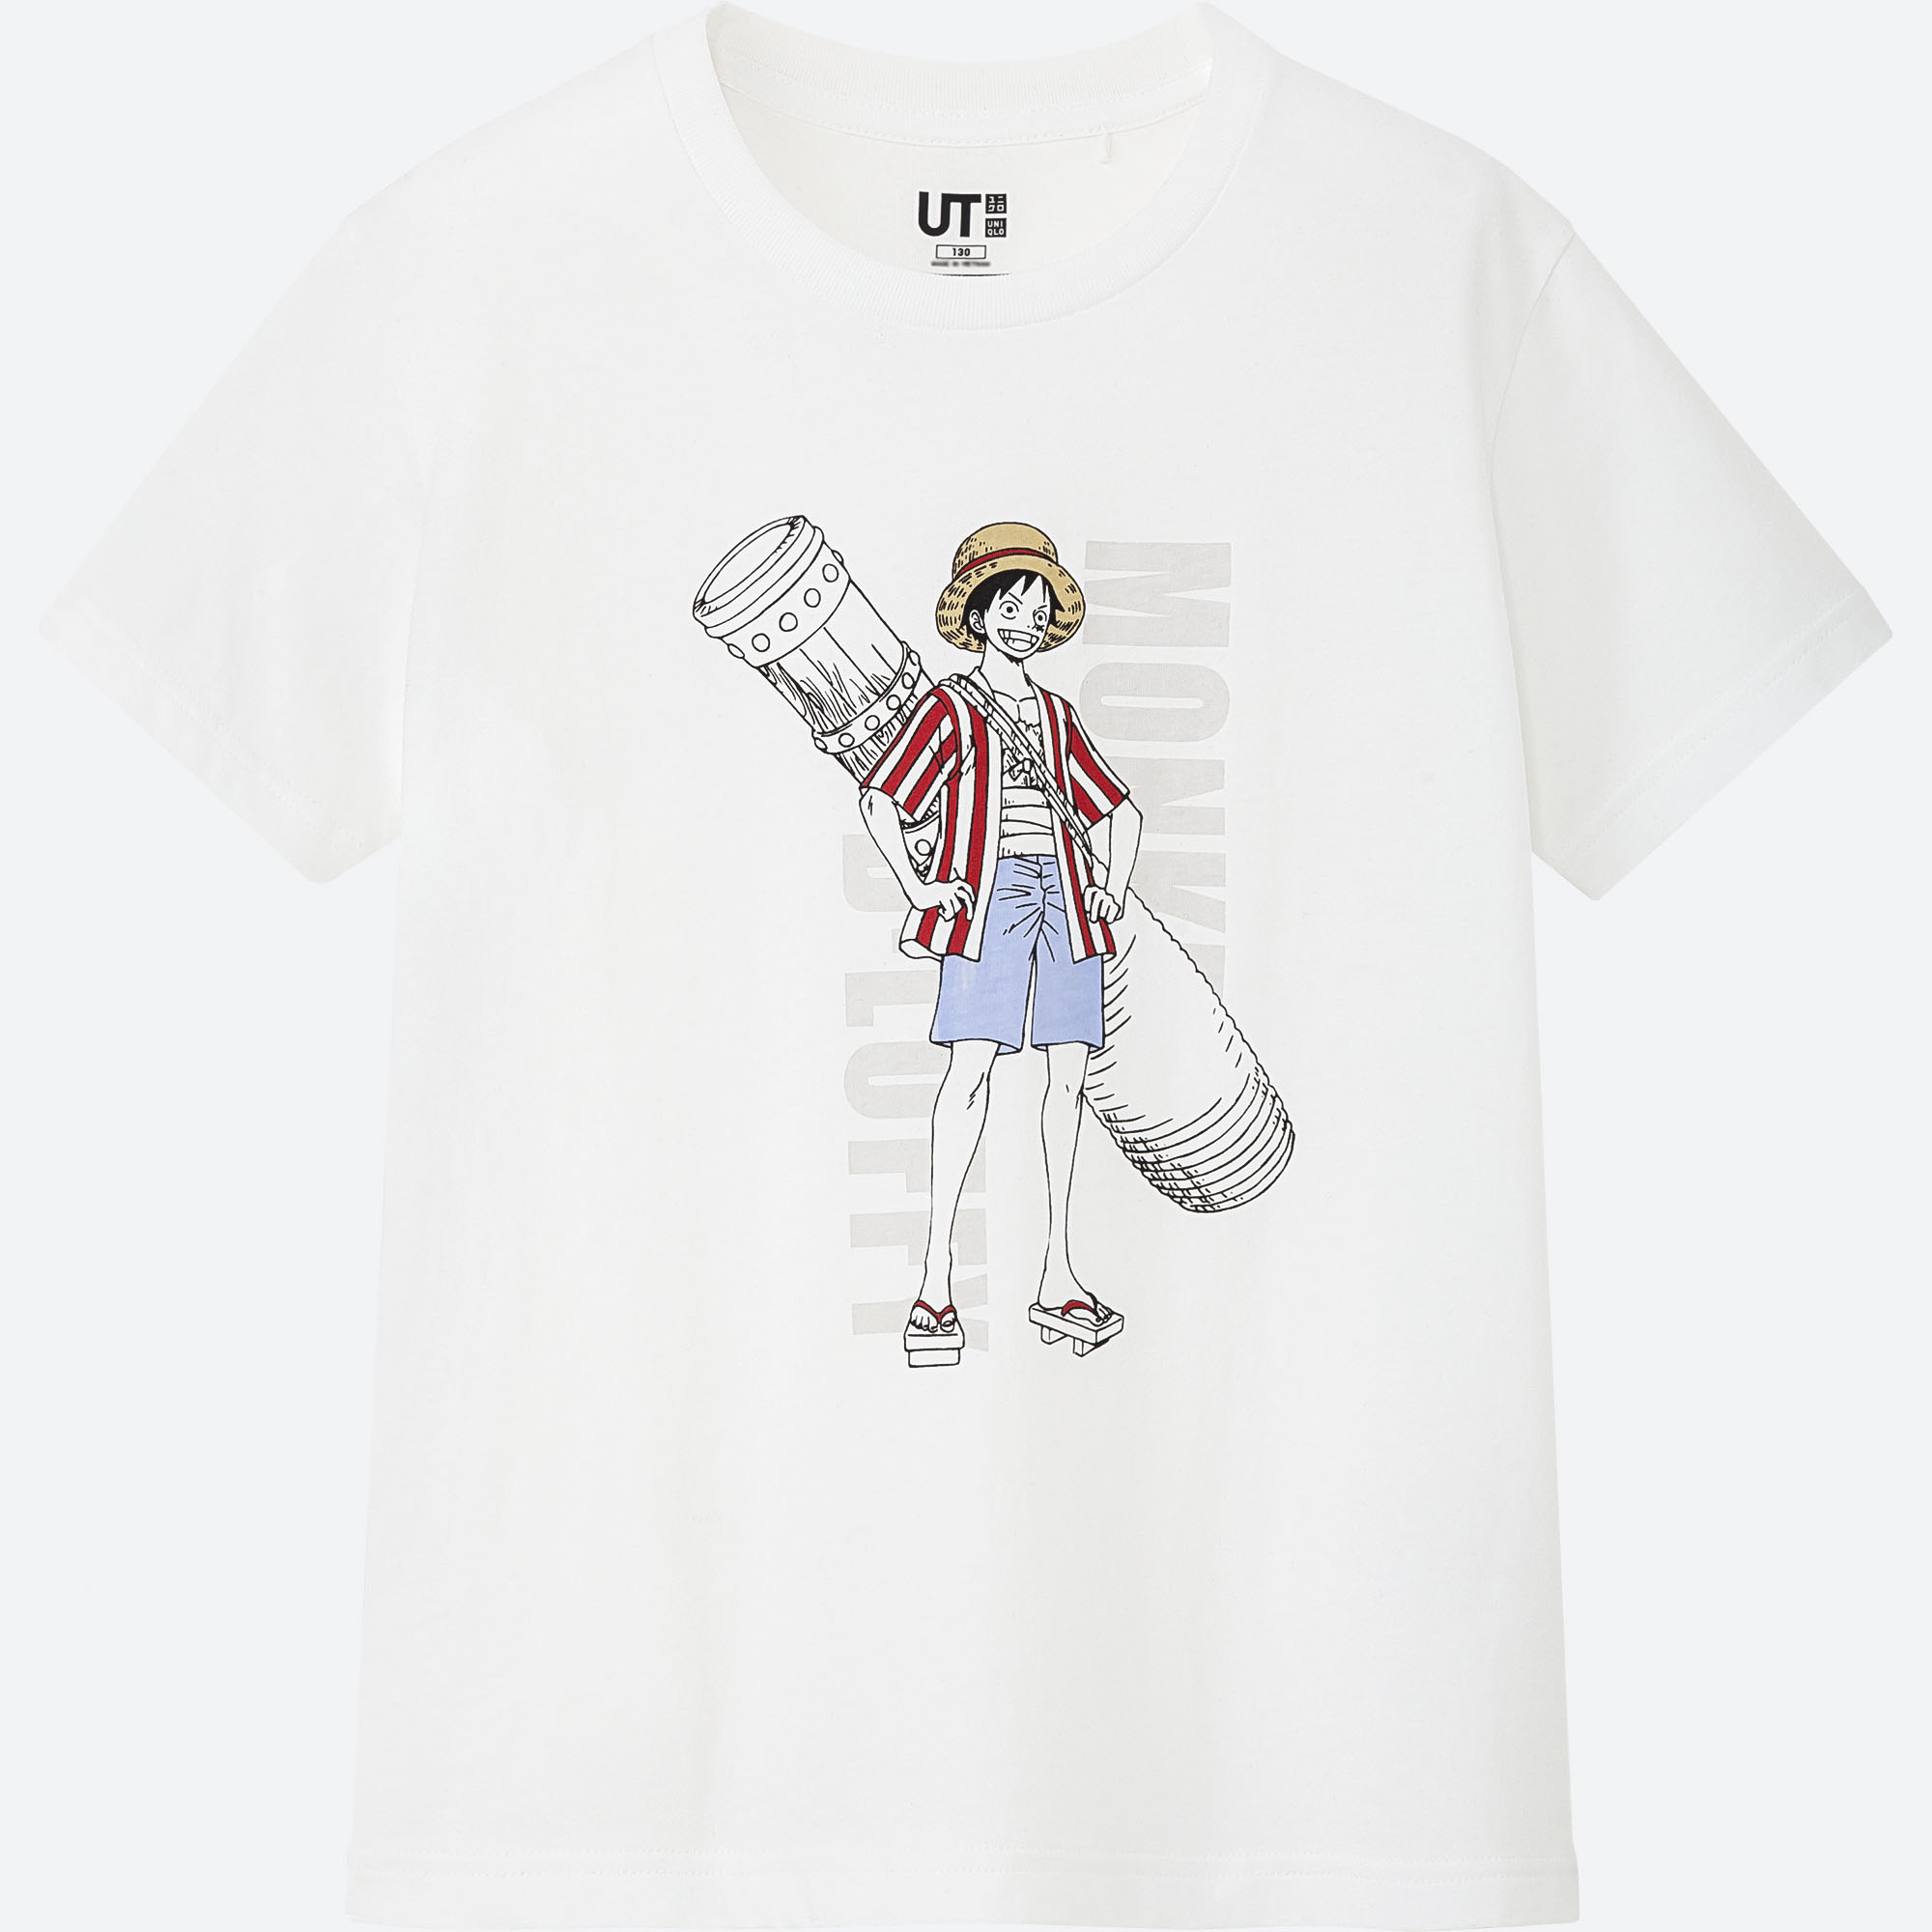 One Piece Stampede T Shirts To Be Released By Uniqlo For Upcoming Film Moshi Moshi Nippon もしもしにっぽん